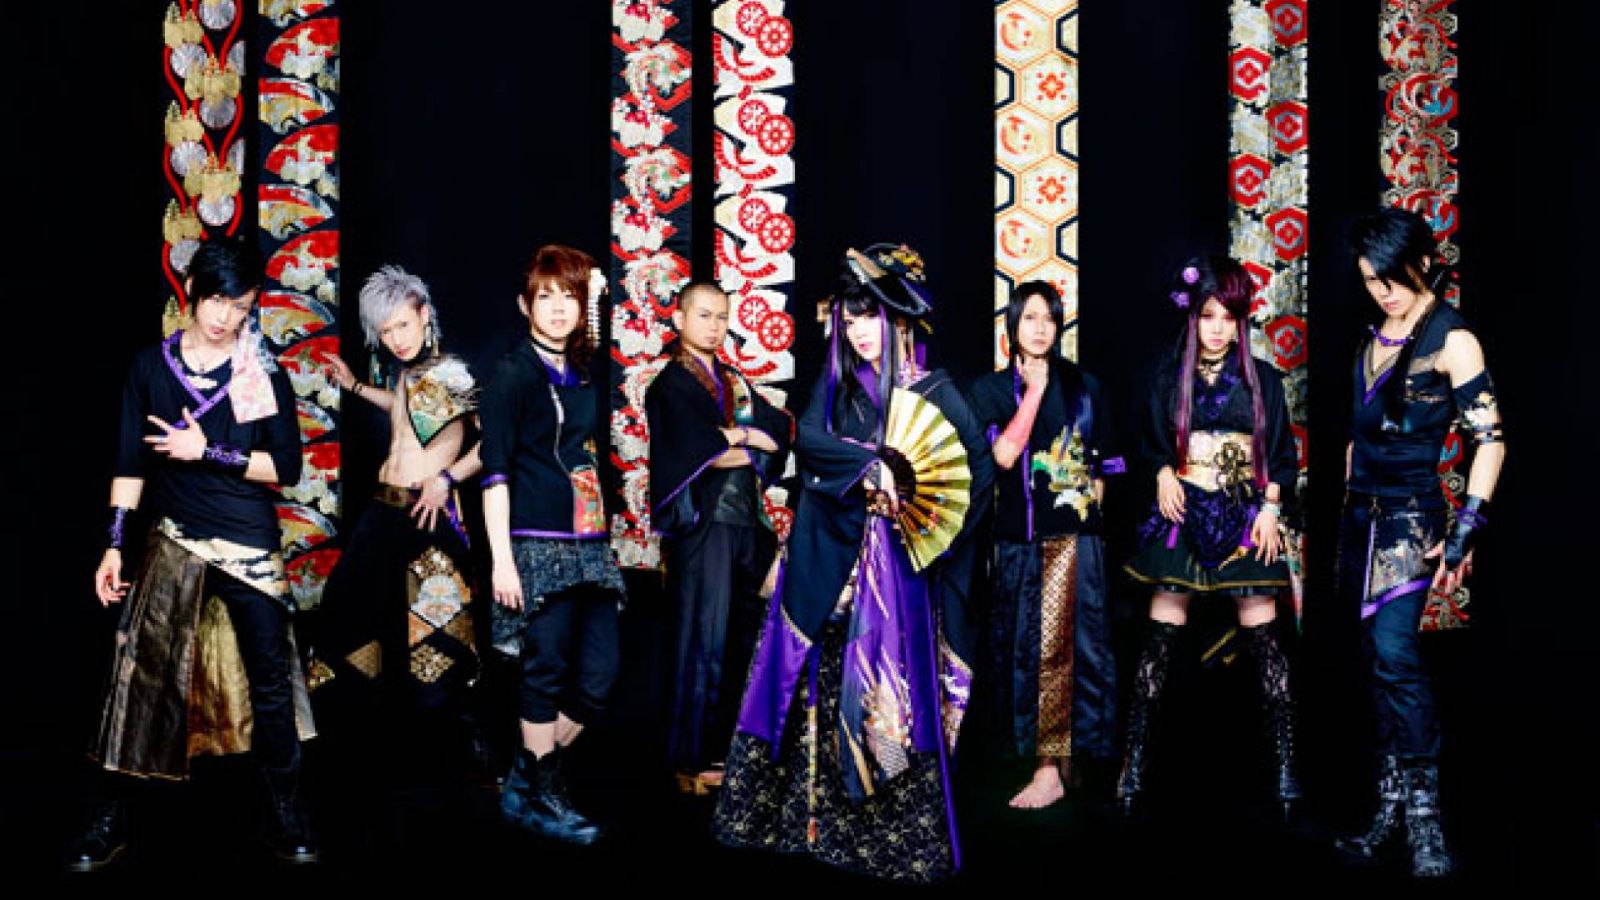 WagakkiBand – Strong Fate © 2015 Avex Music Creative Inc. Provided by Cool Japan Music, Inc.